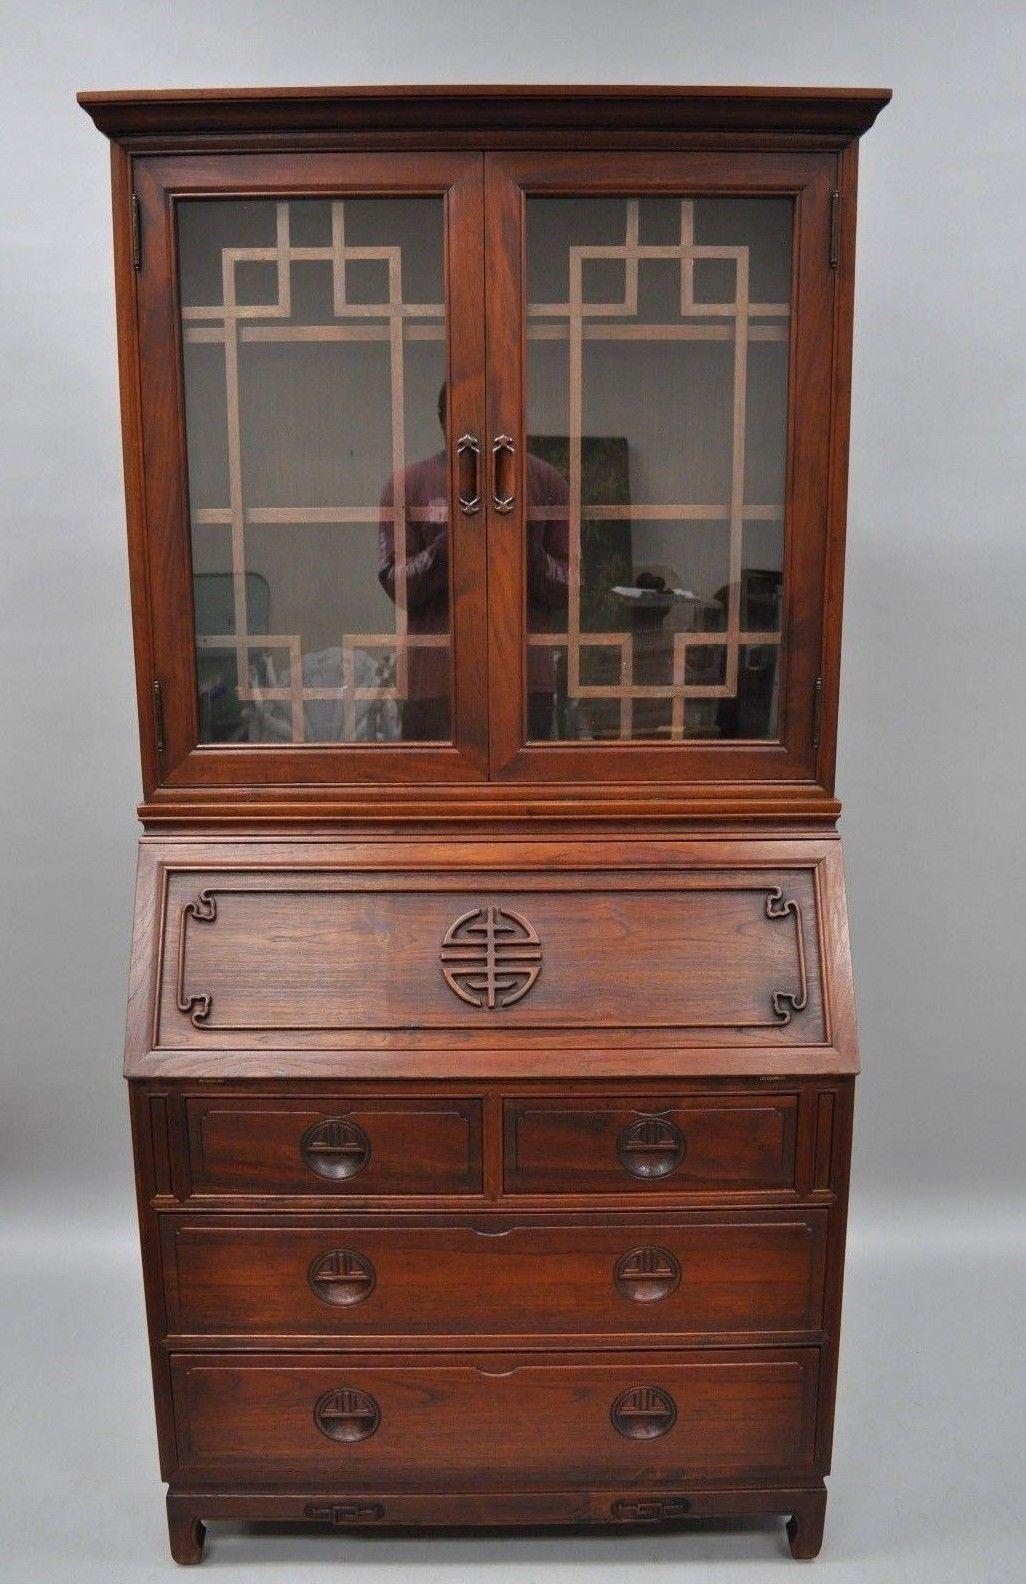 Chinese hardwood Oriental secretary desk. Item features two piece construction, carved side panels, fitted interior, beautiful woodgrain, nicely carved details, two glass swing doors with wood lattice, seven dovetailed drawers, and two adjustable